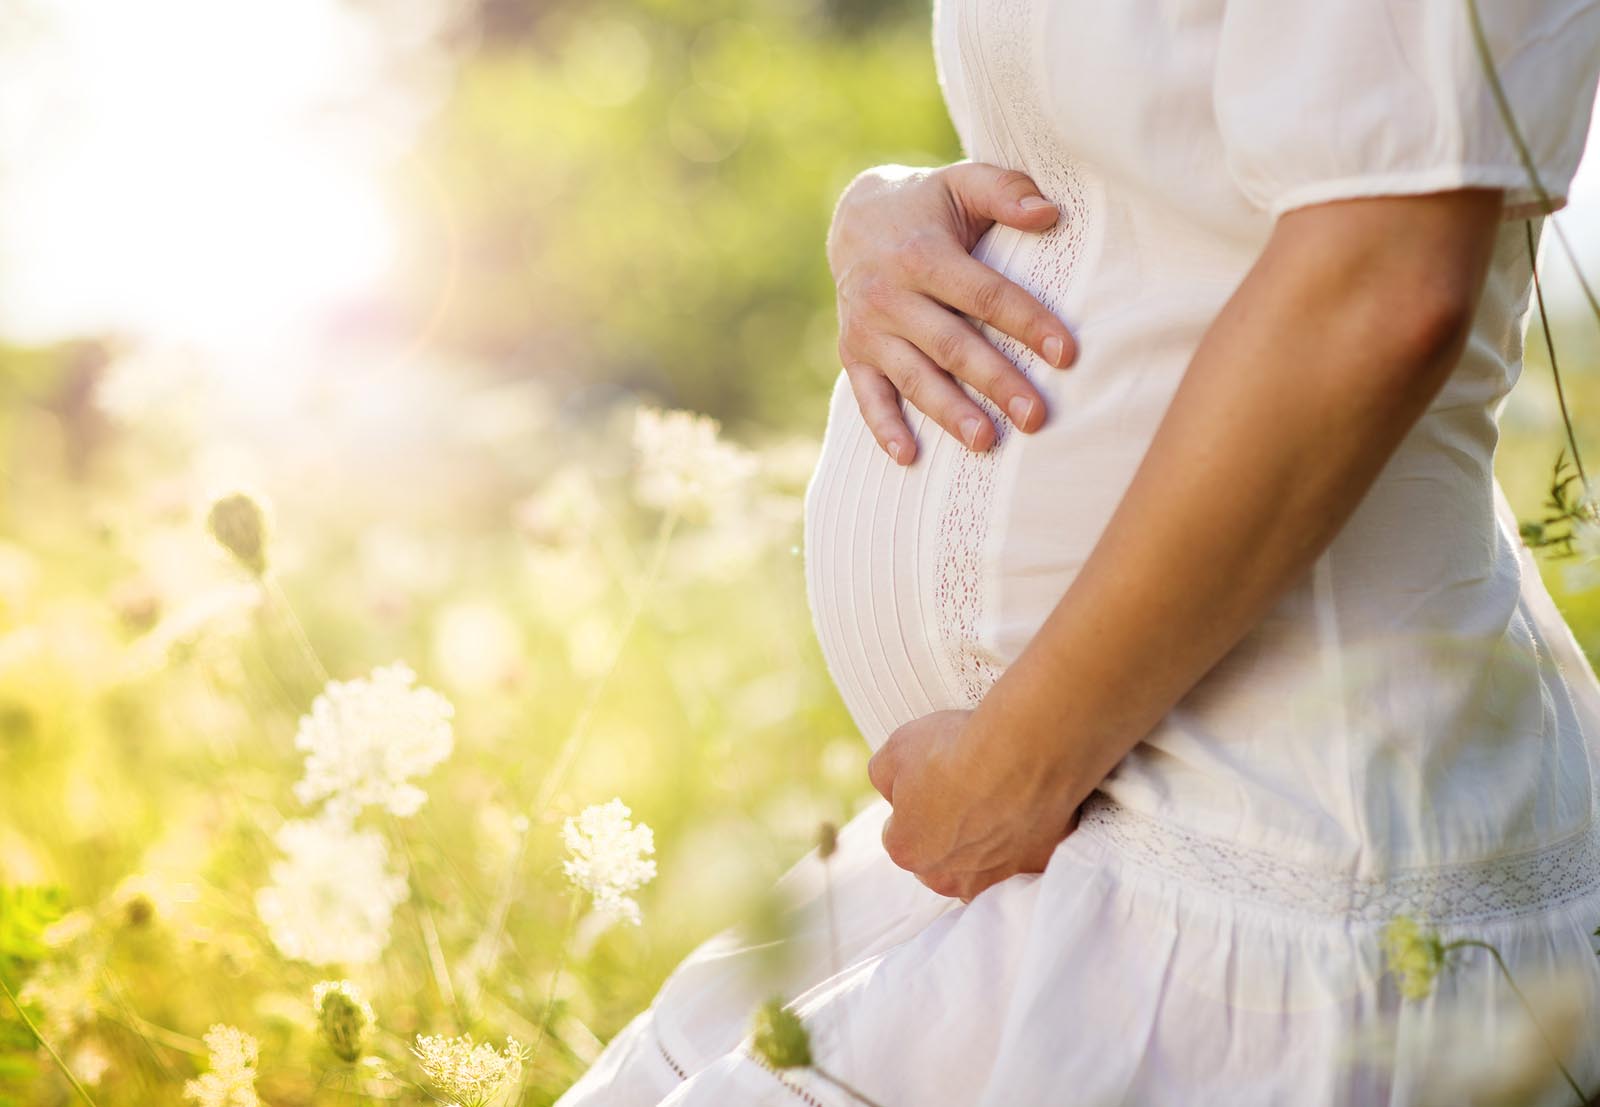 Dealing with a GBS+ pregnancy may seem daunting, but with these simple, effective tips, you can feel confident as your approach the birth of your new babe.